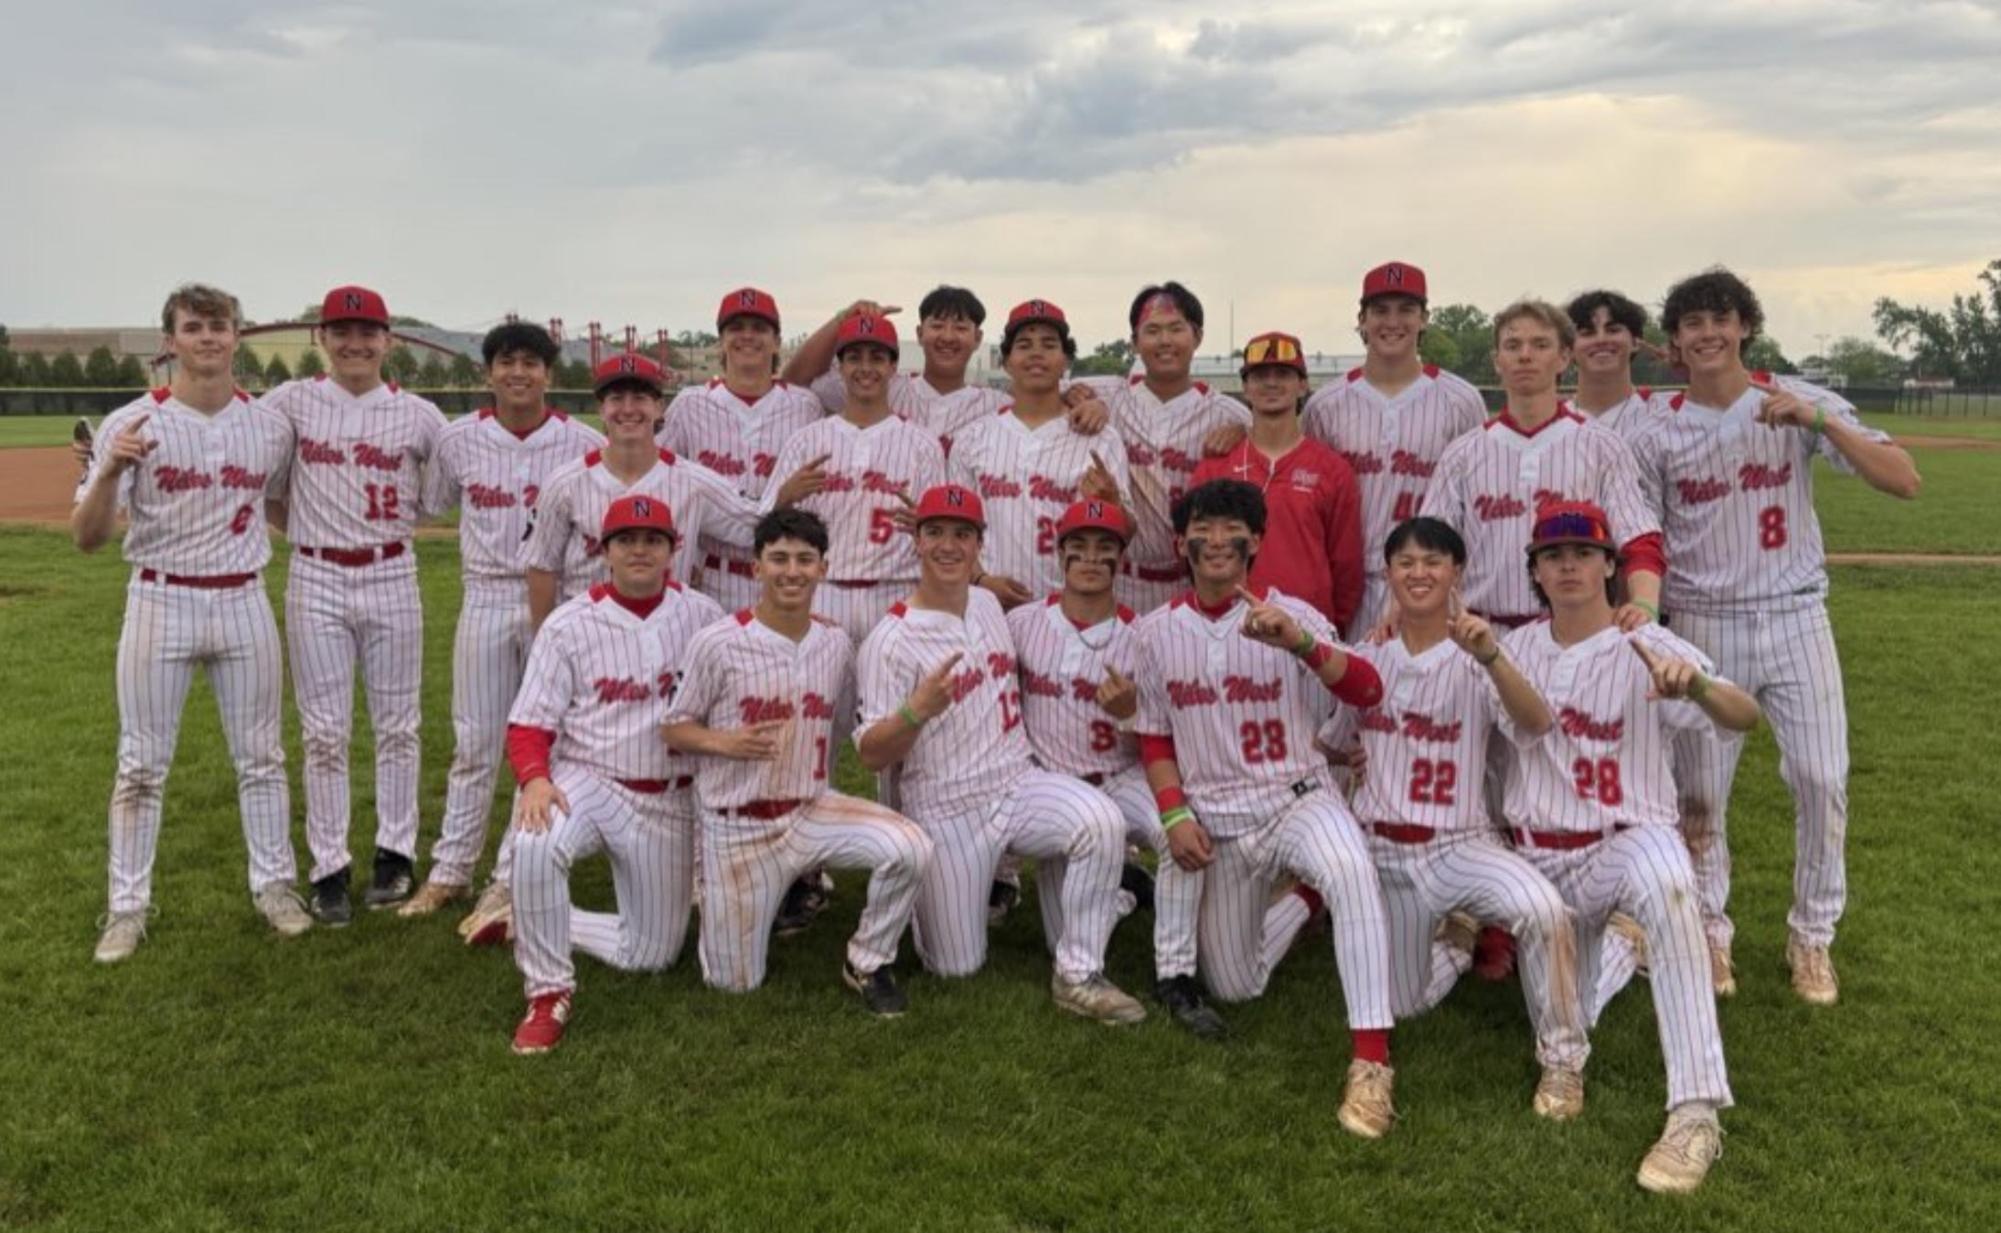 Niles West Baseball Team Clinches CSL North Conference Title After 37-Year Drought